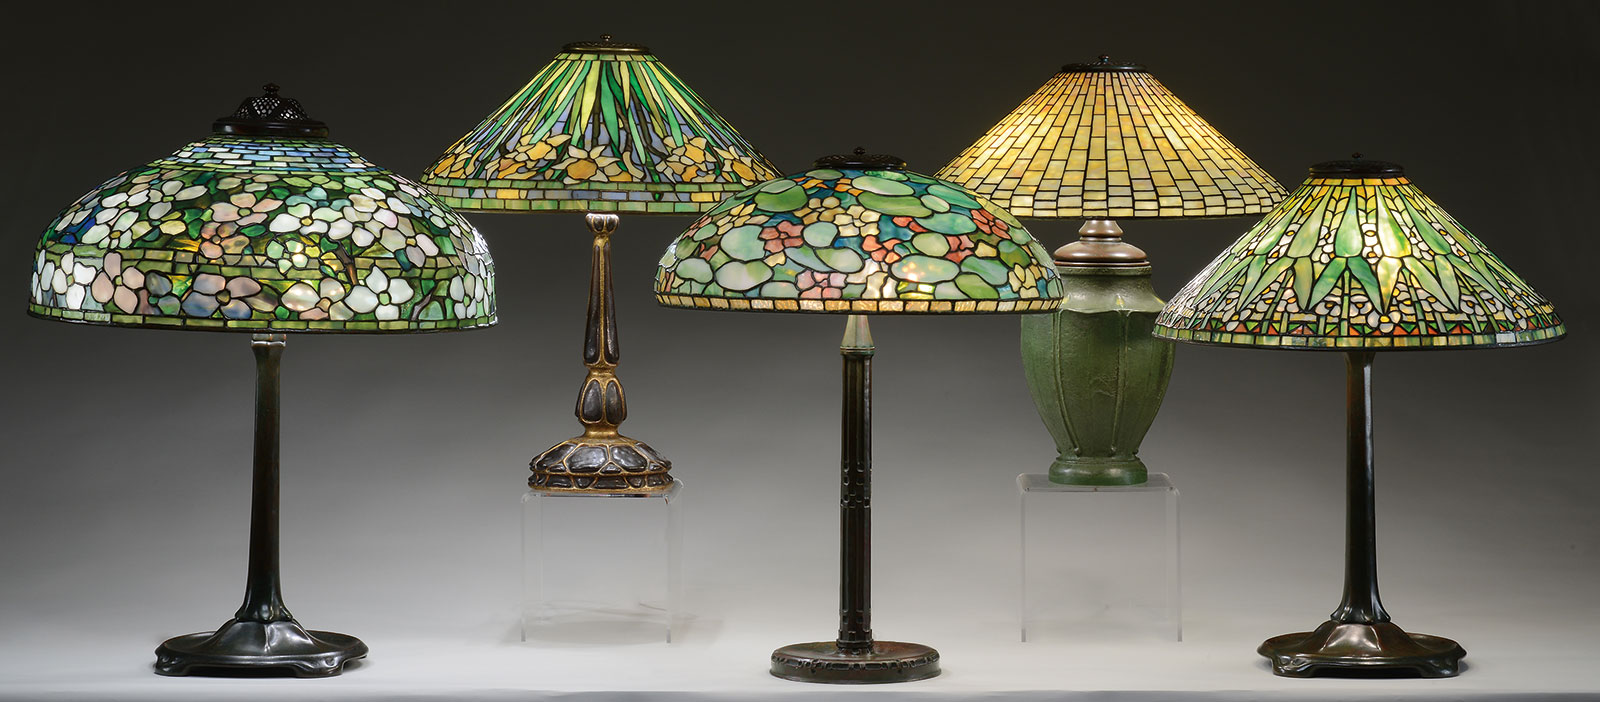 Tiffany Lamps From the Loup Collection